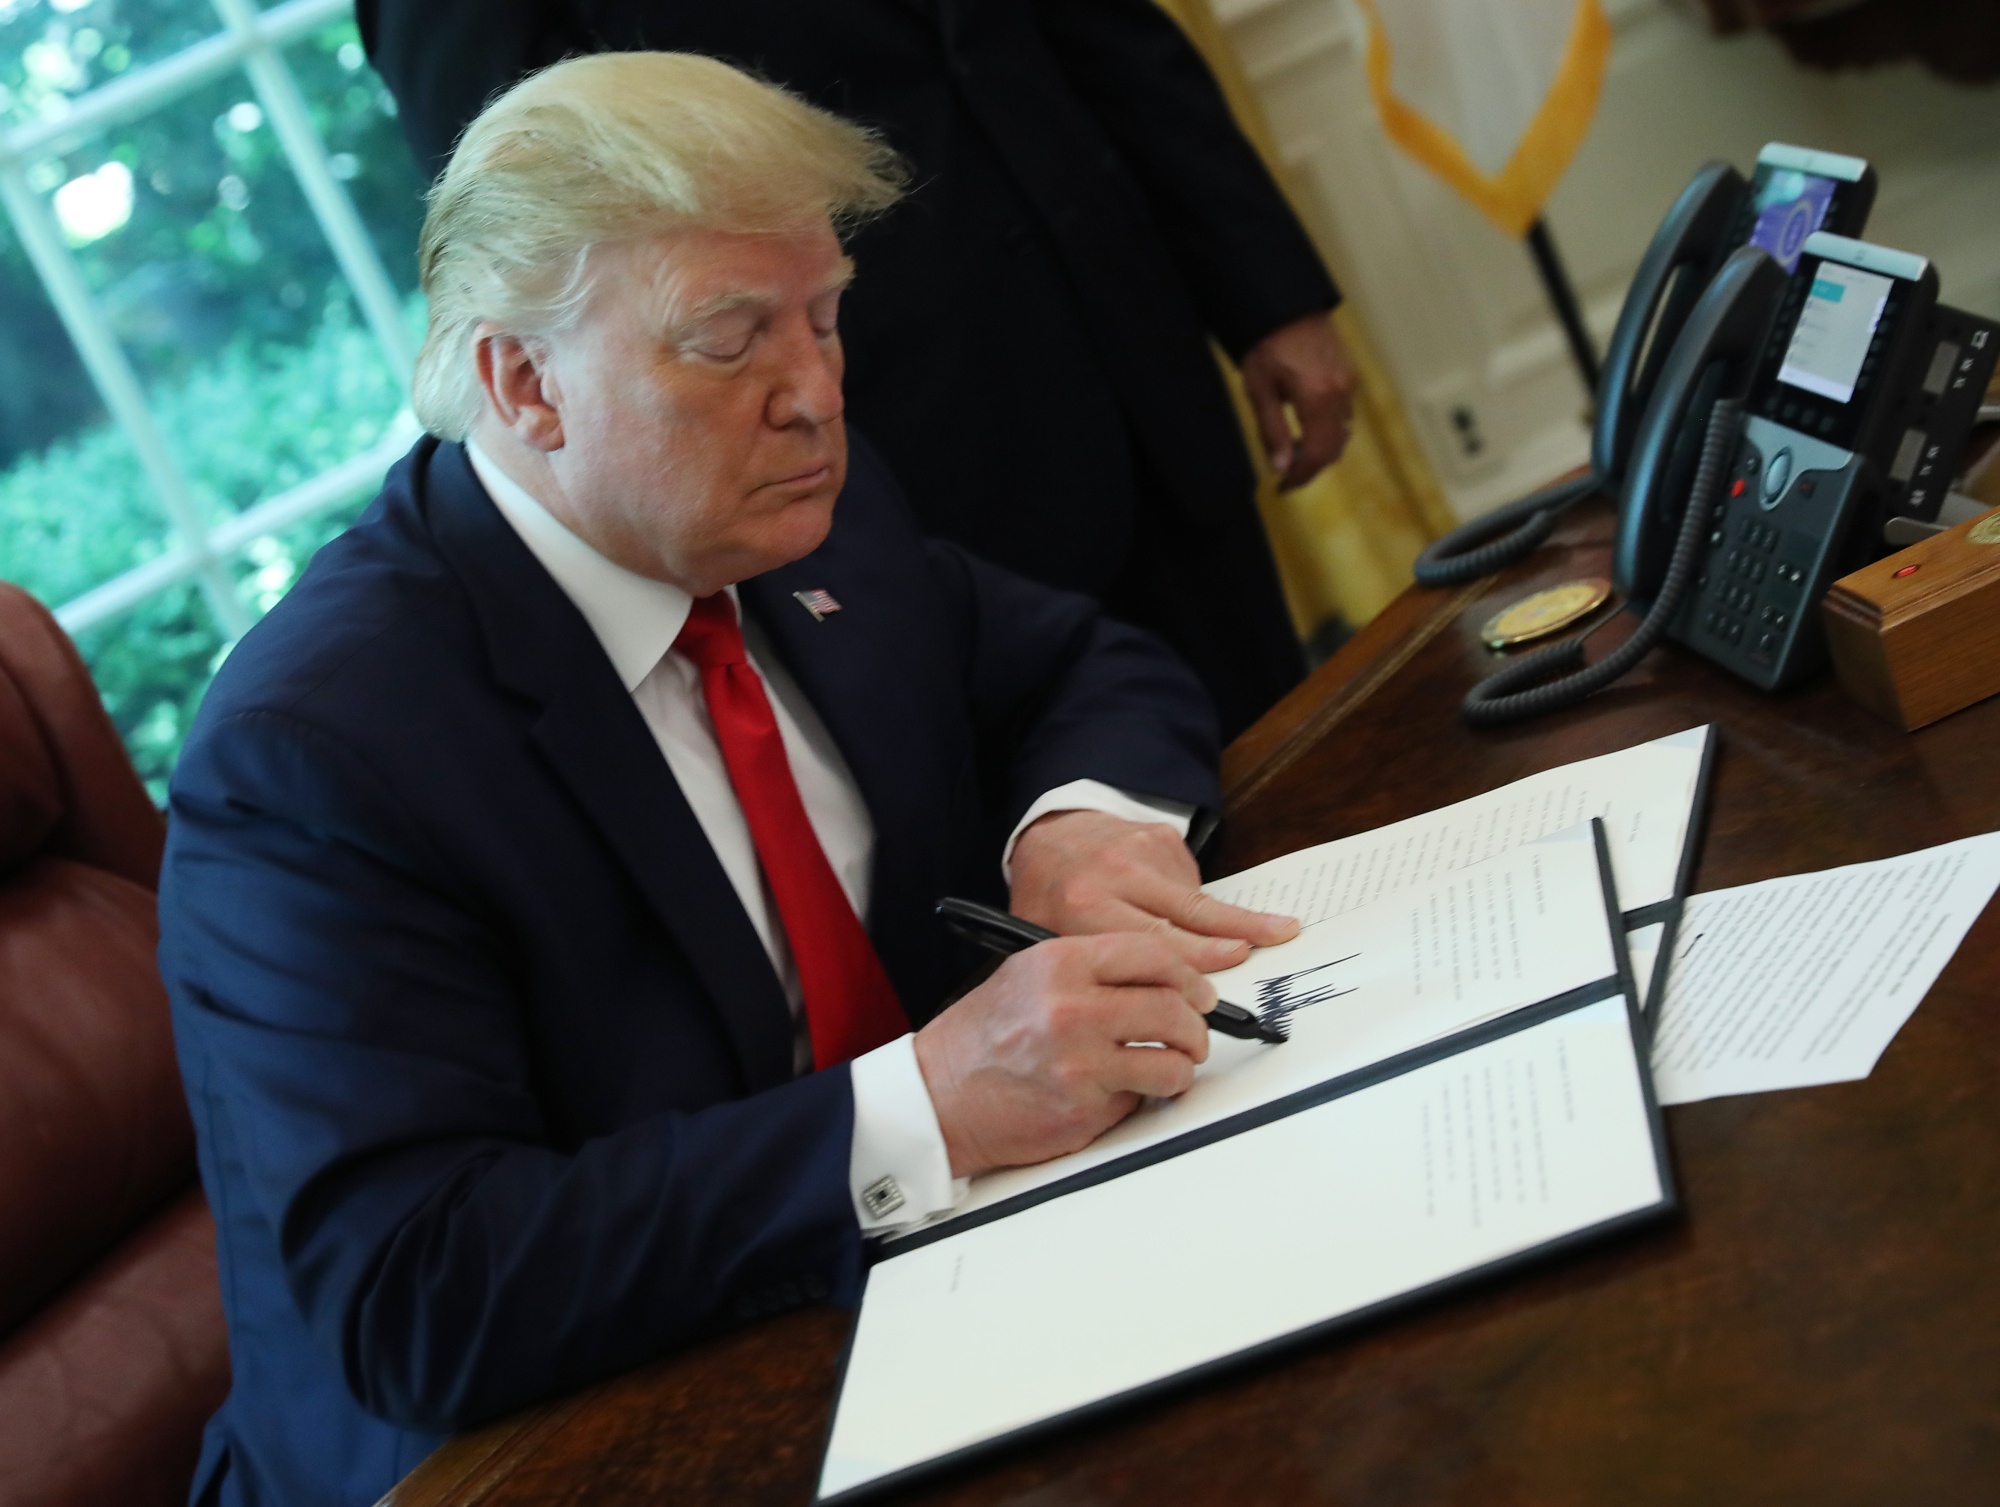 Signing an executive order imposing new sanctions on Iran, June 2019.